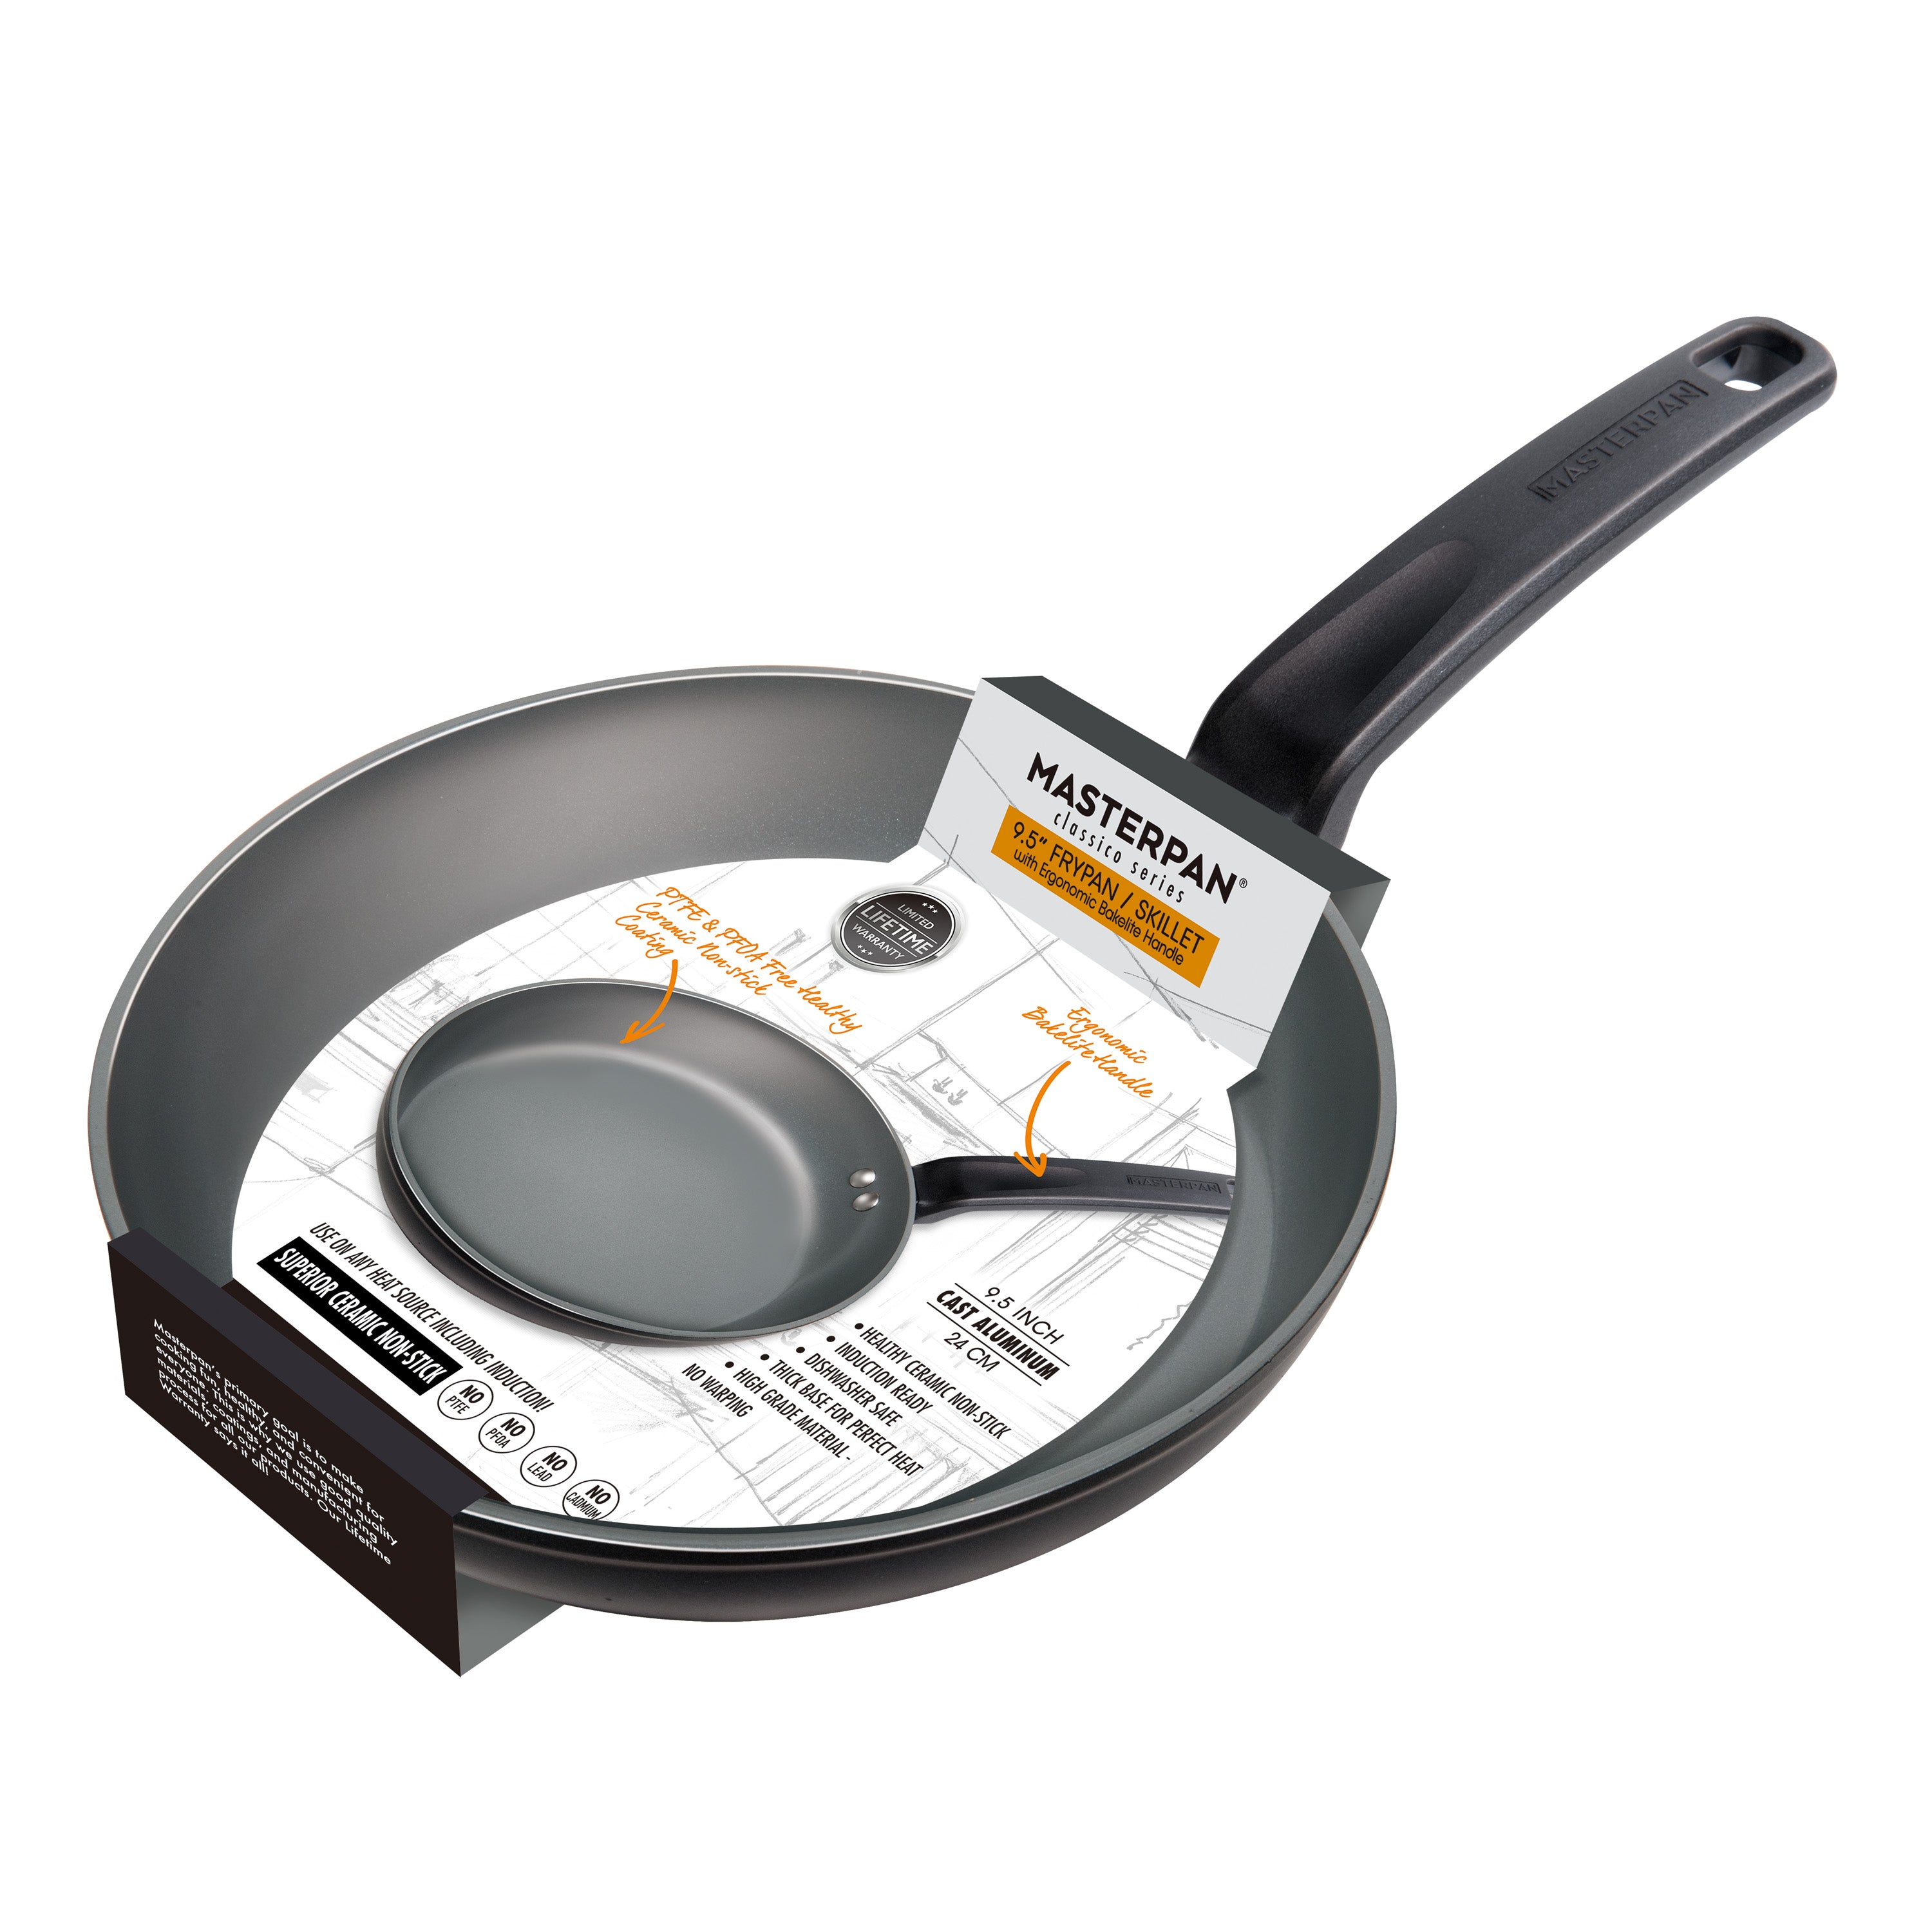 MasterPRO Smart by MasterPRO - 11 Forged Aluminum Fry Pan with Ceramic Non  Toxic Non Stick Interior,Polished